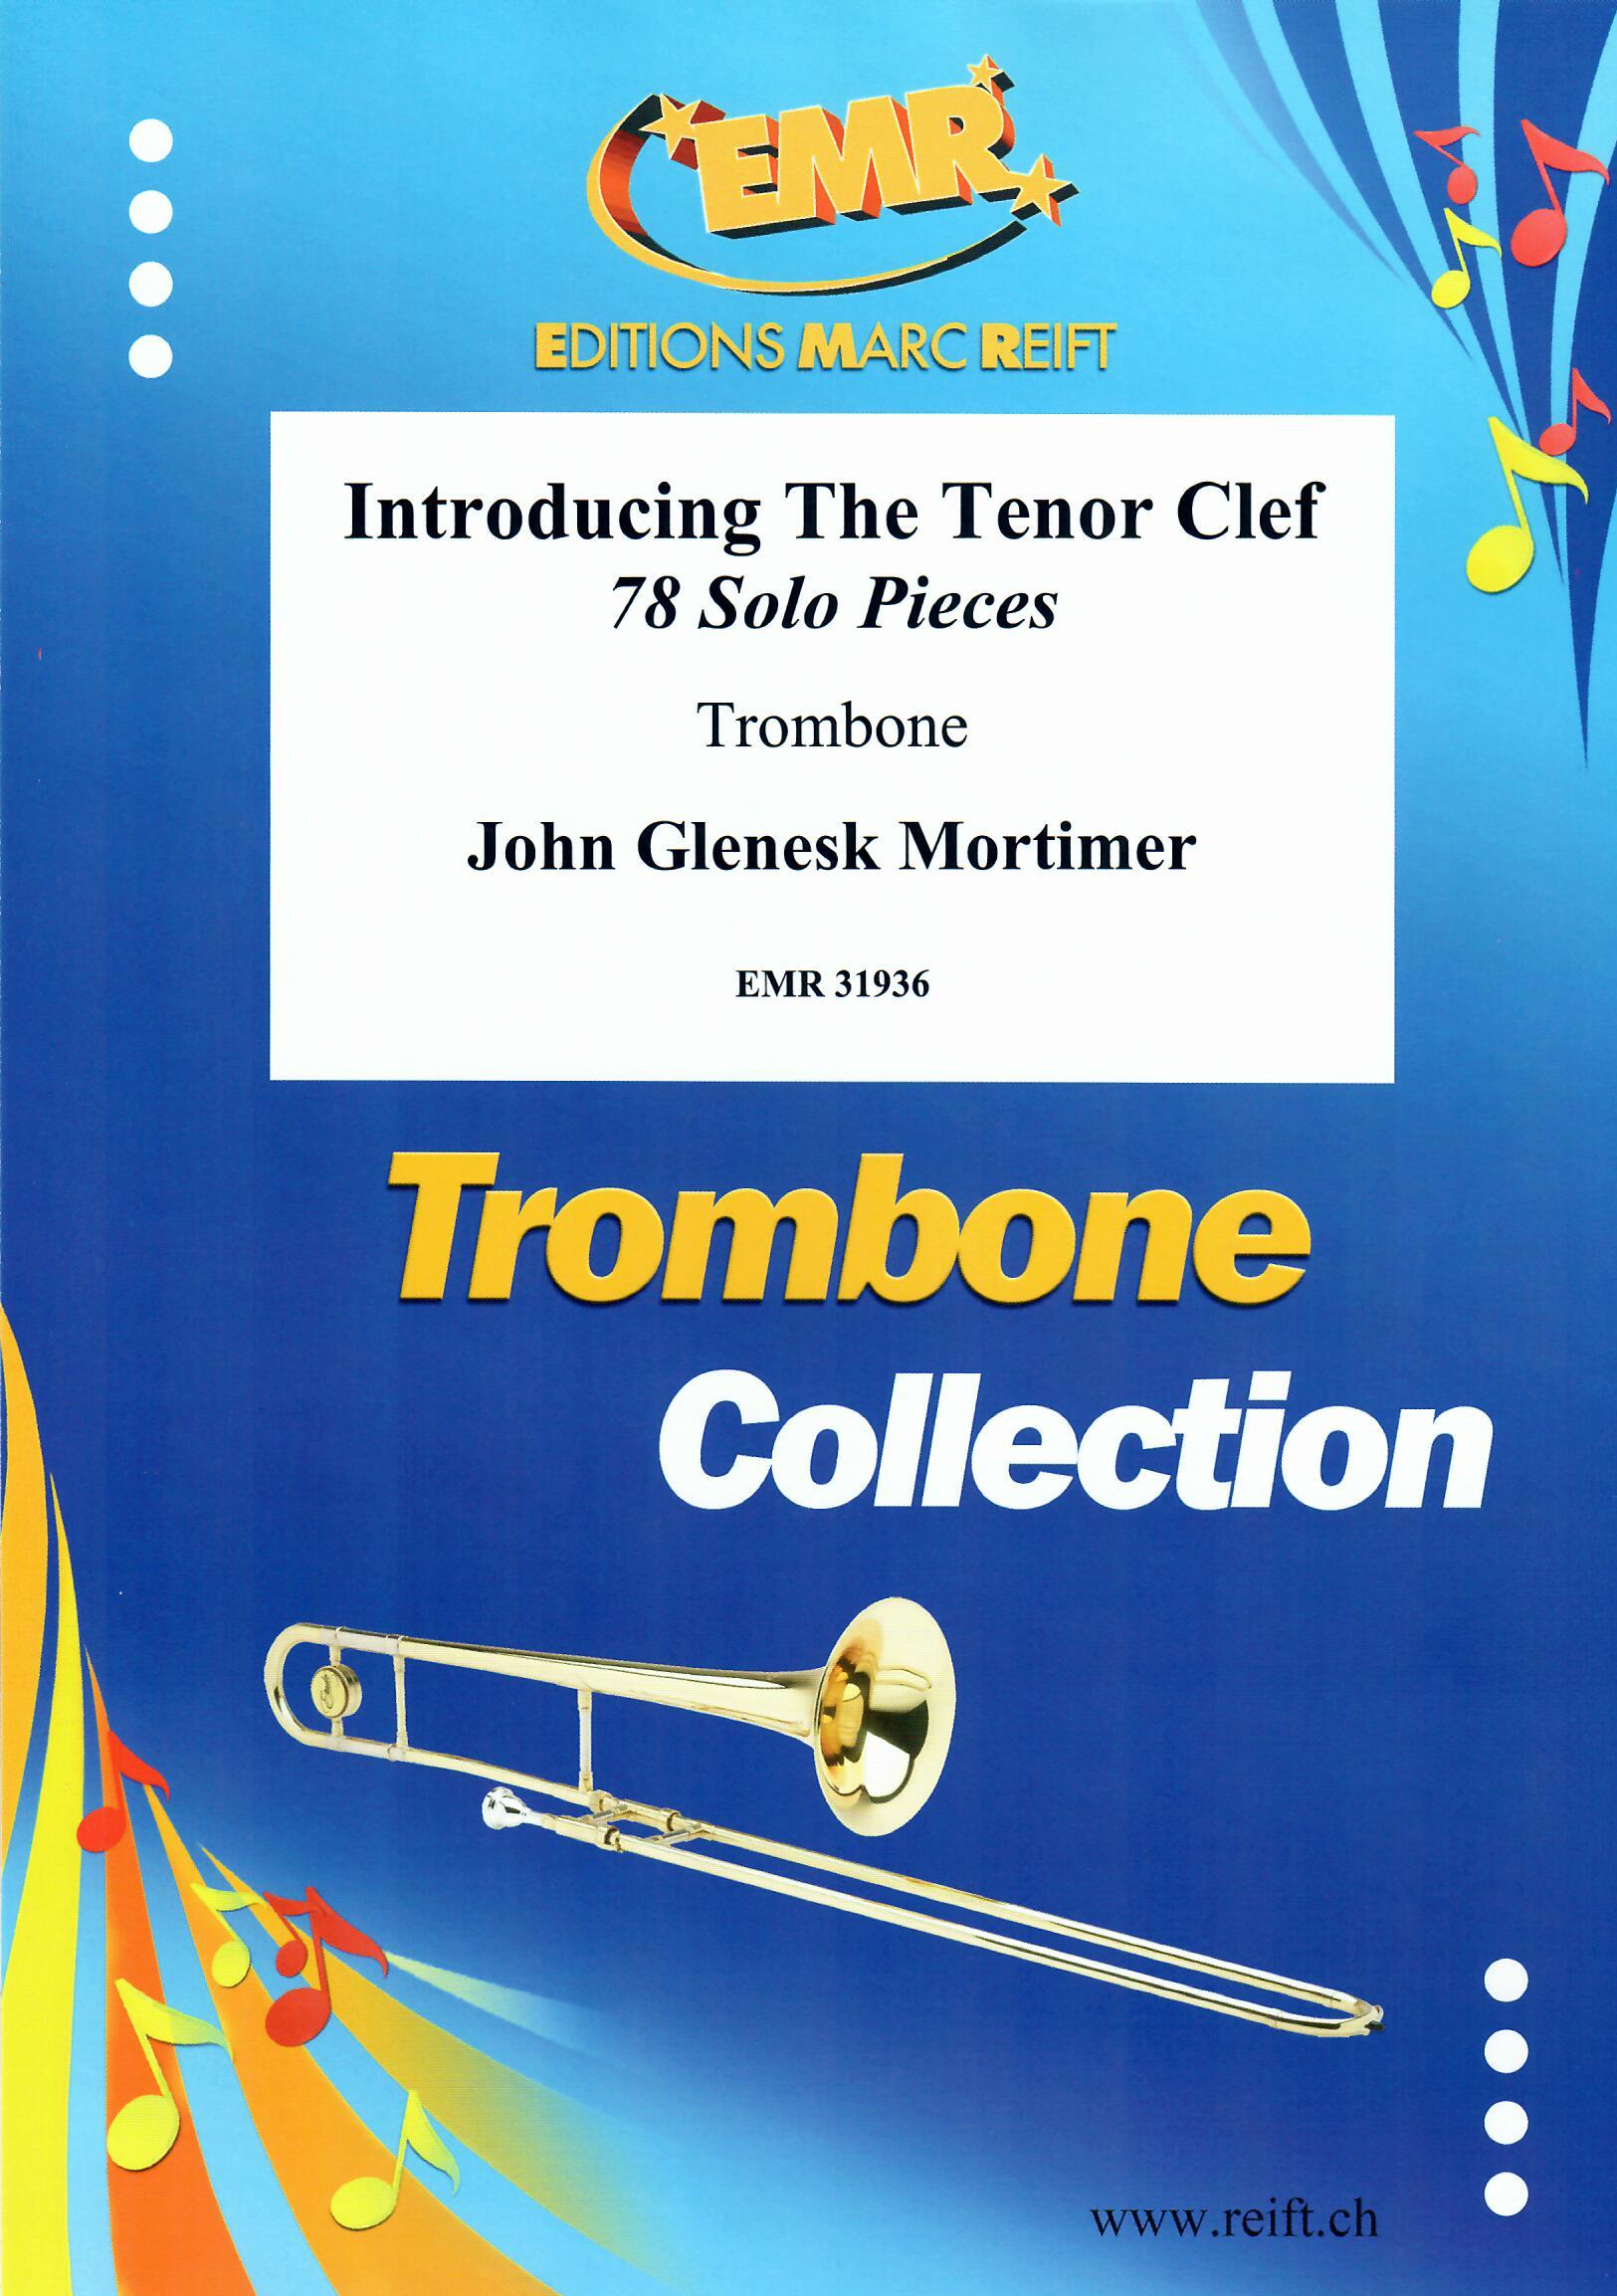 INTRODUCING THE TENOR CLEF (78 SOLO PIECES), SOLOS - Trombone